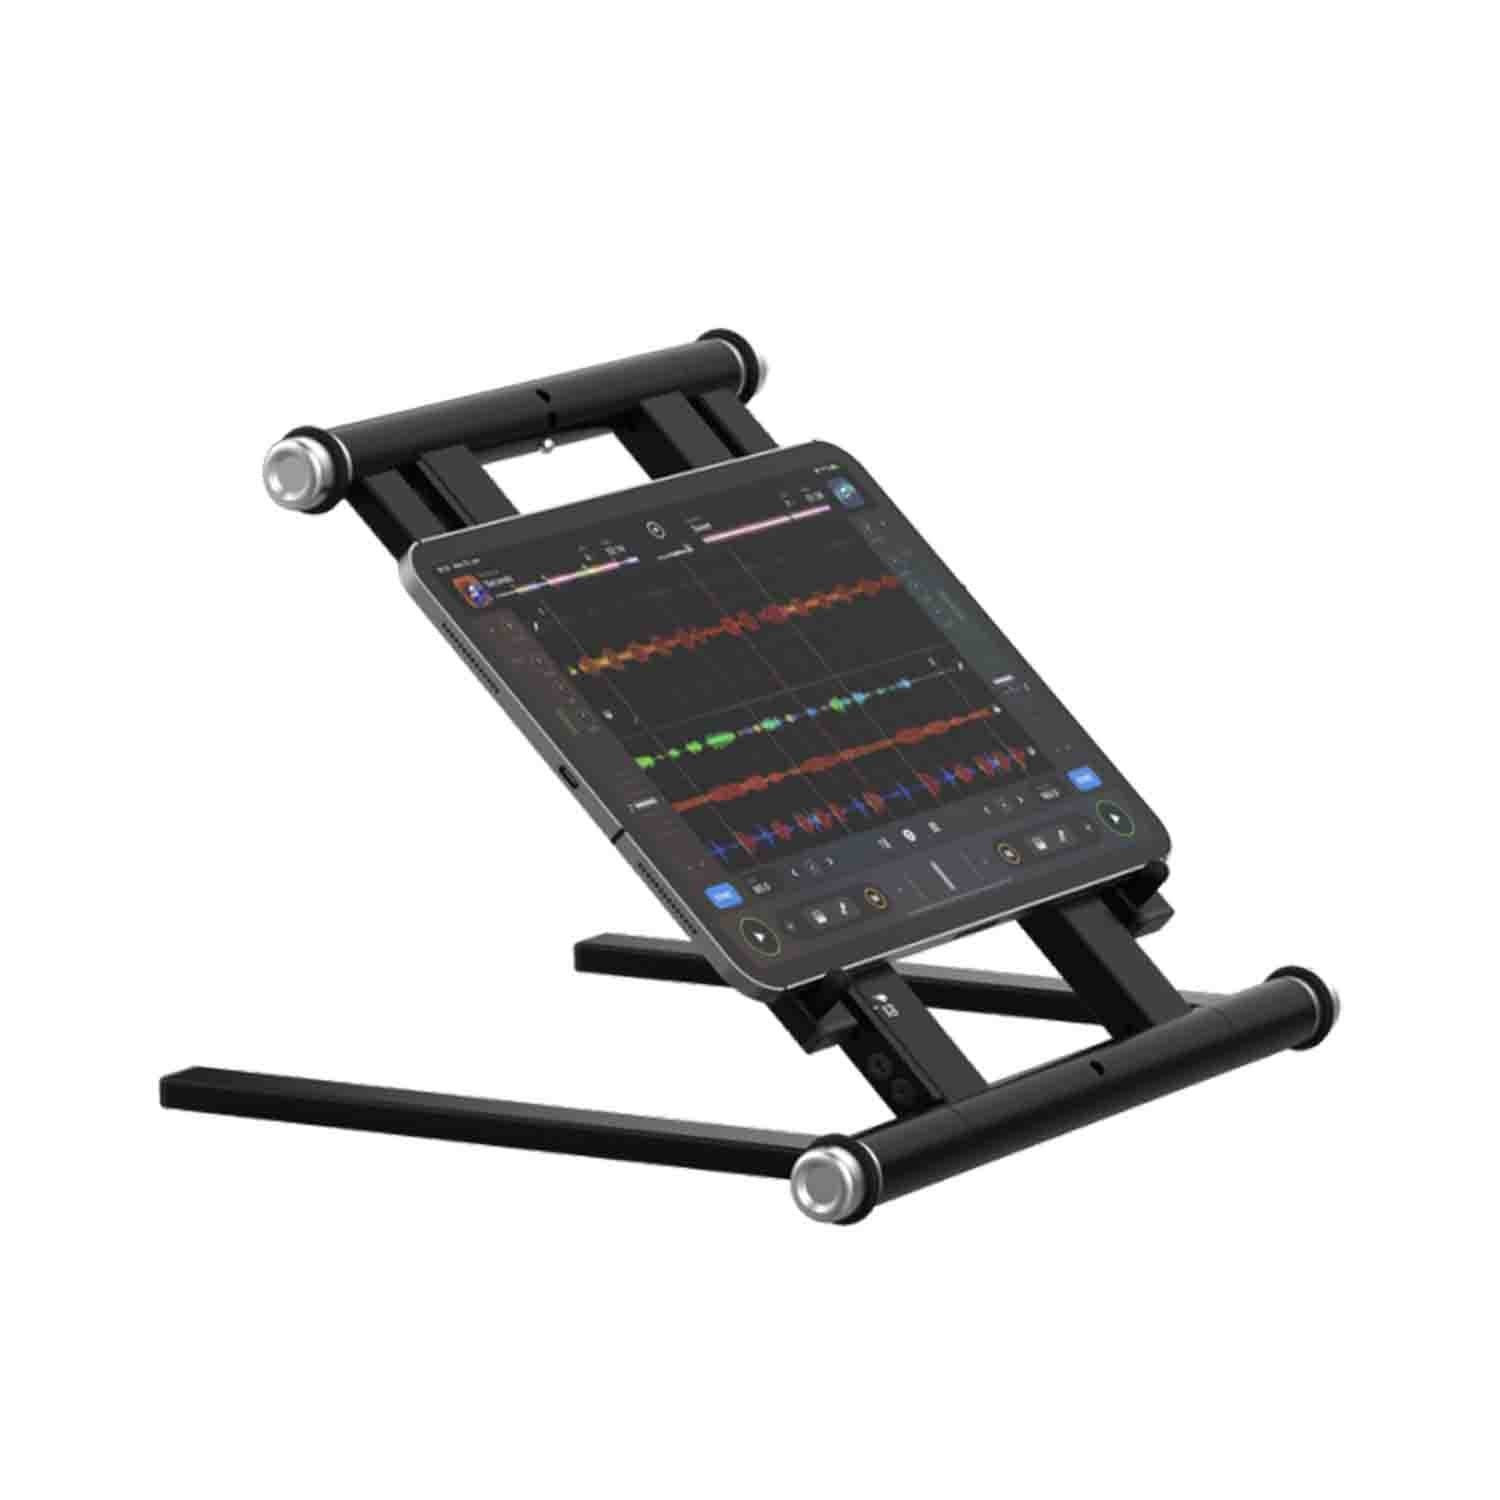 B-Stock: Reloop STAND HUB Advanced Laptop Stand with USB-C PD Hub - Hollywood DJ